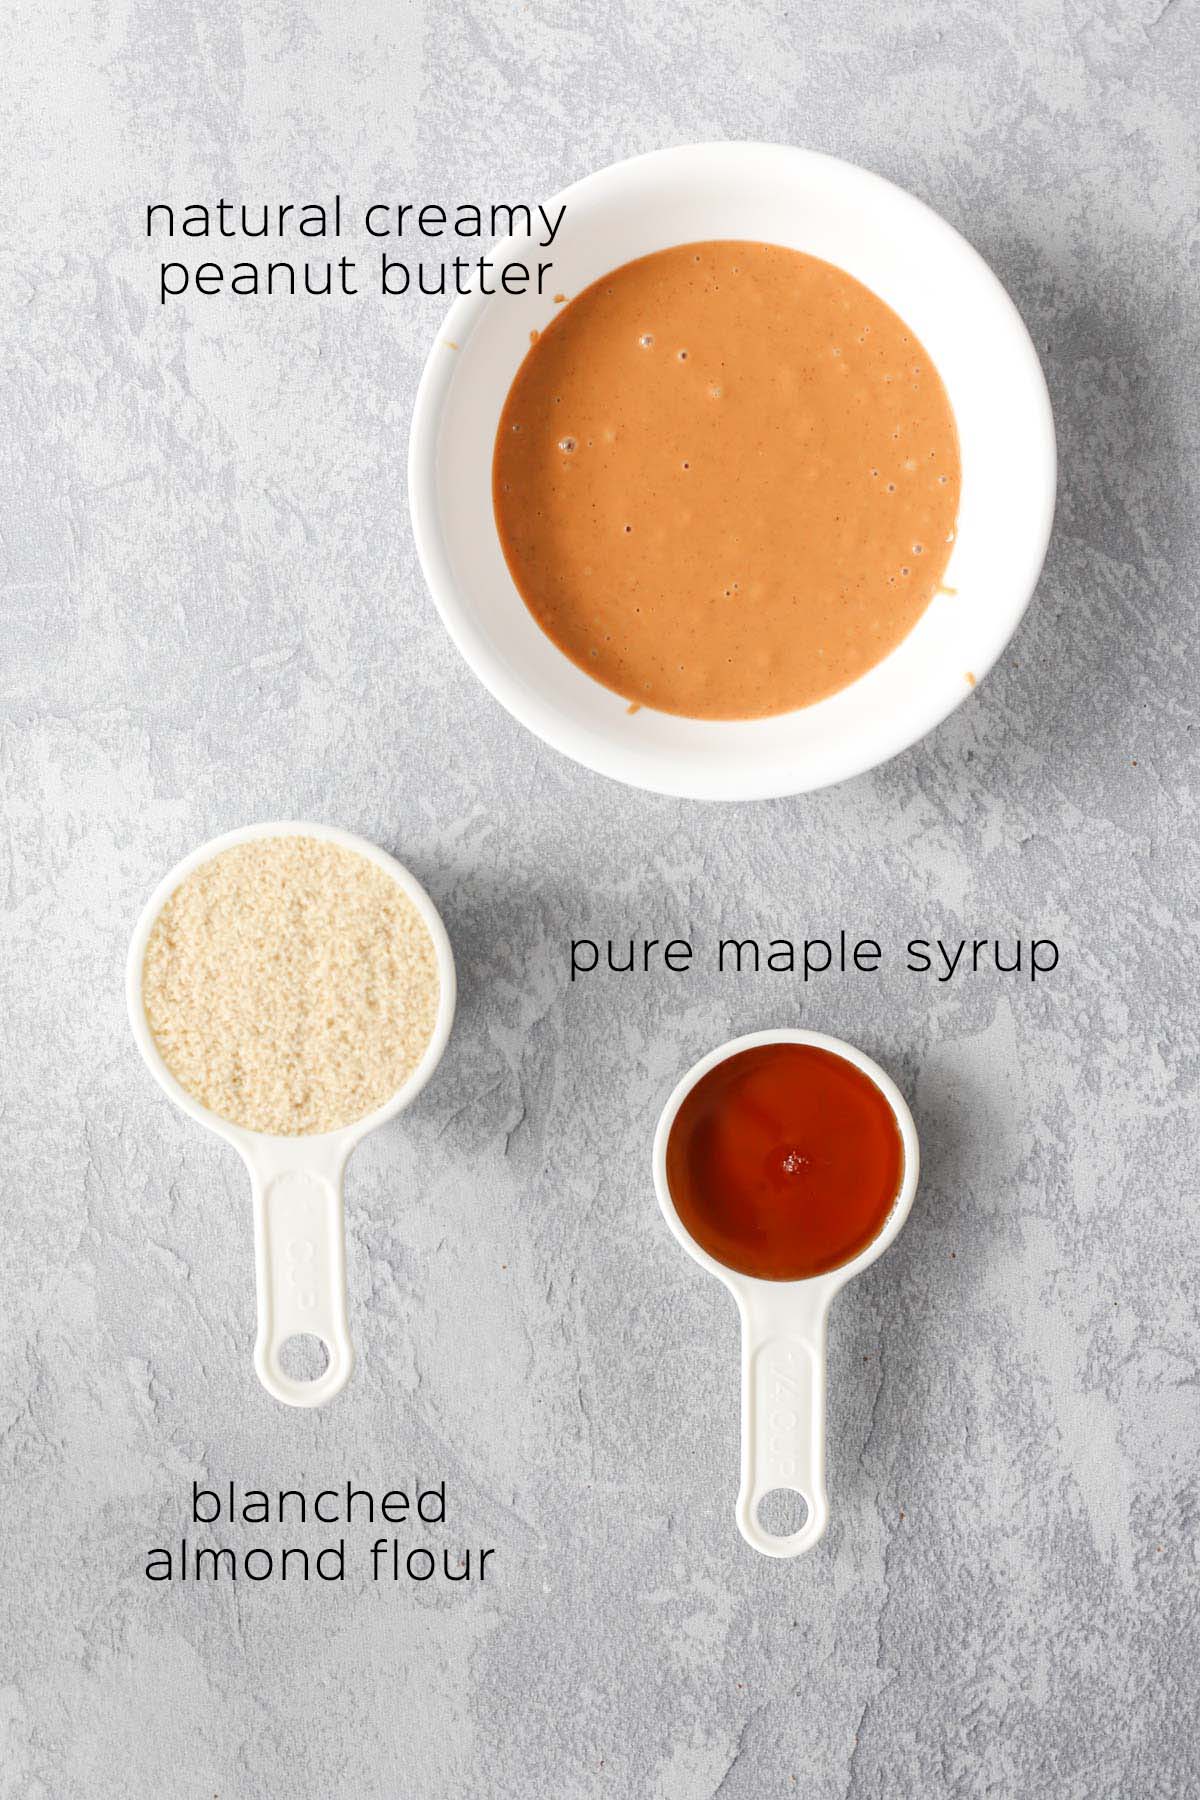 the ingredients needed to make the cookies, including peanut butter, almond flour, and maple syrup.